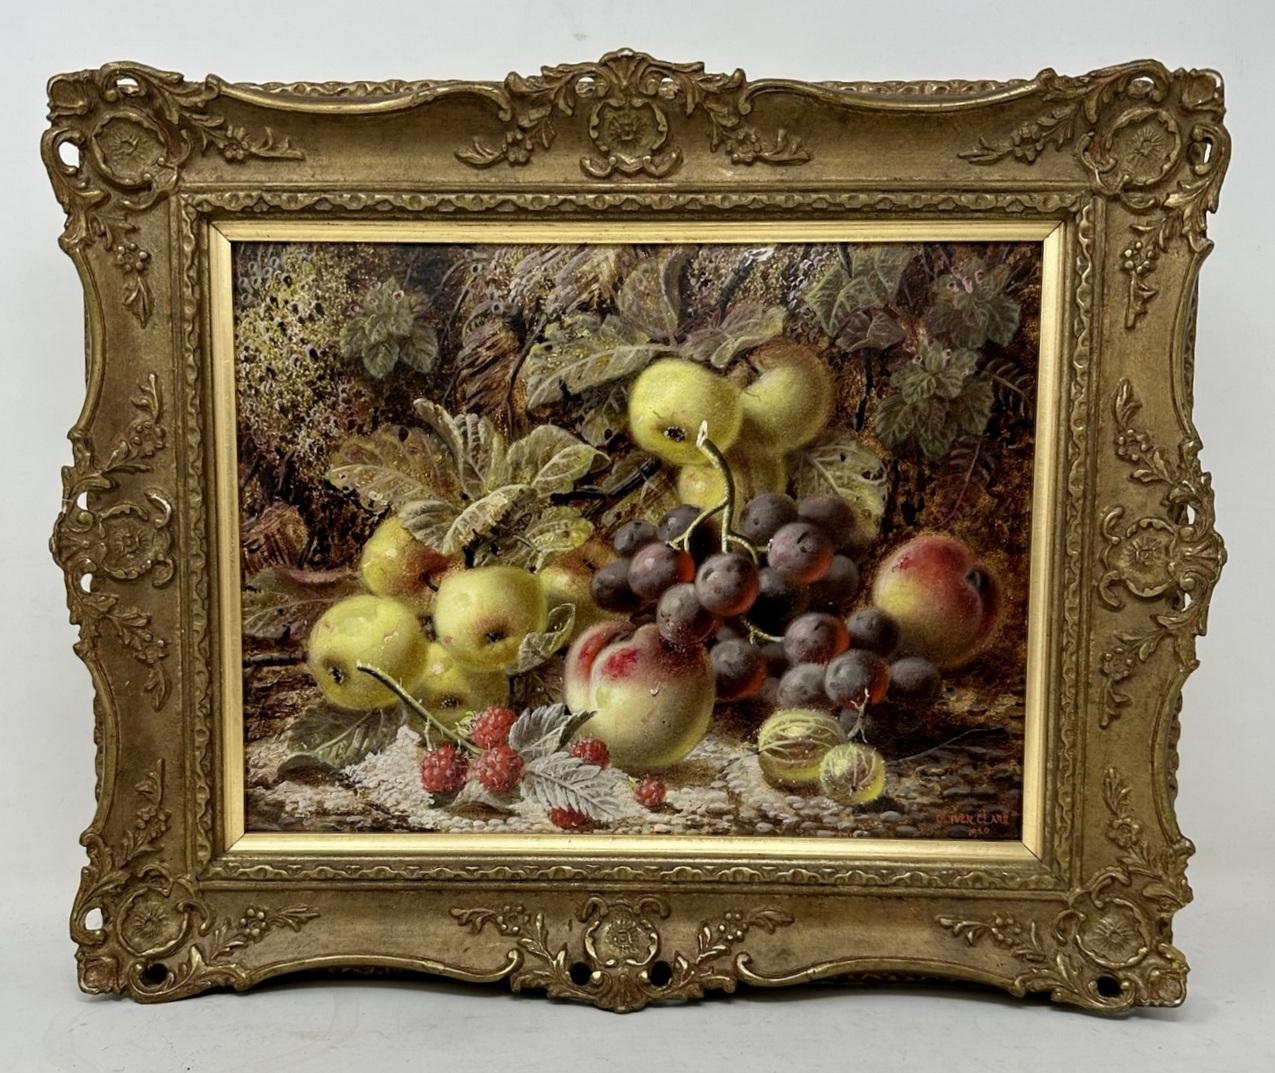 An exceptionally fine quality example of a framed still life of fruits oil painting on Artists board by well documented English Artist Oliver Clare, first quarter of the 20th century. Complete with its original good giltwood frame, signed lower